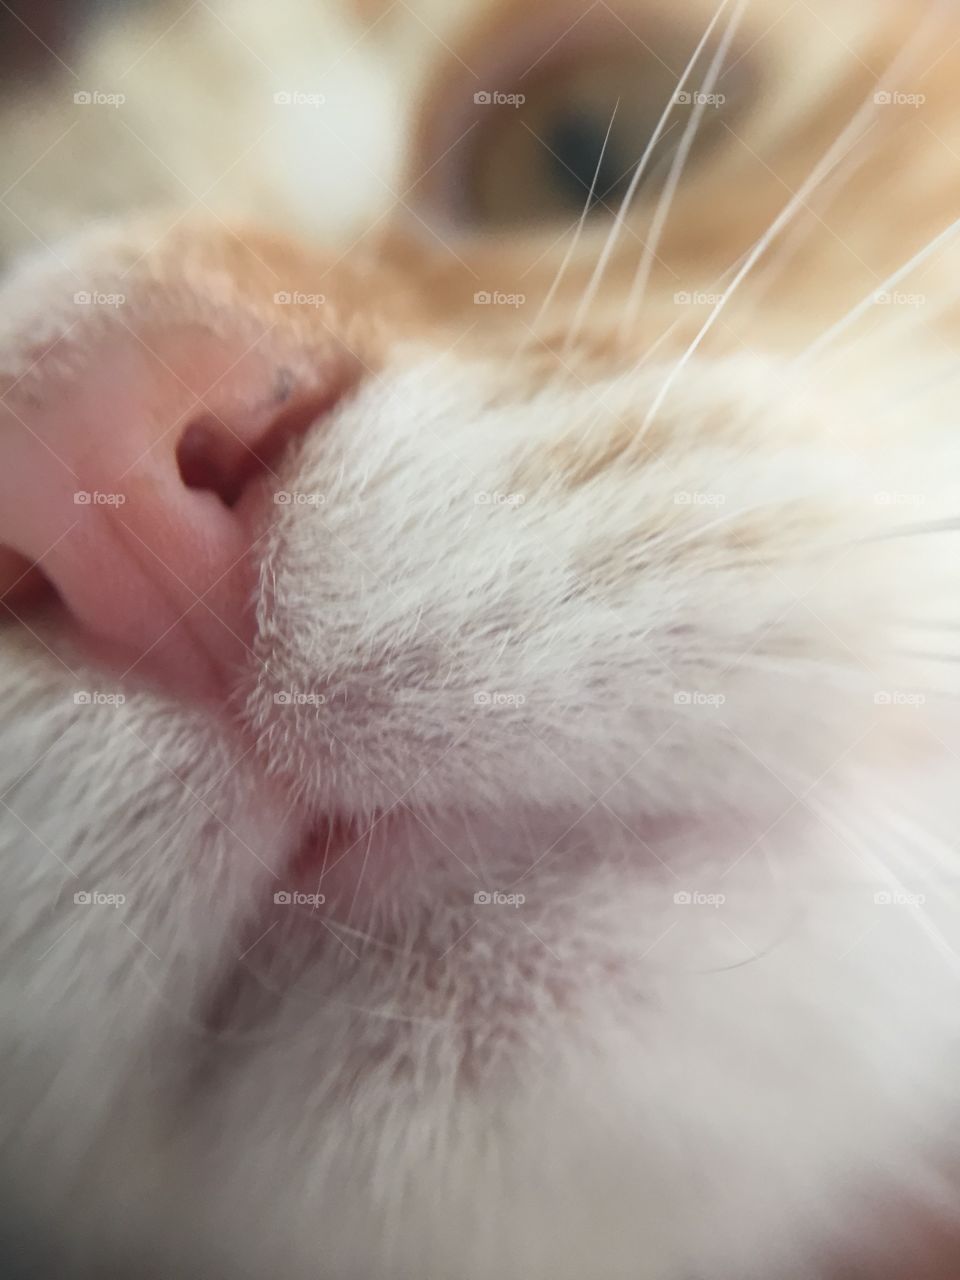 Cat mouth